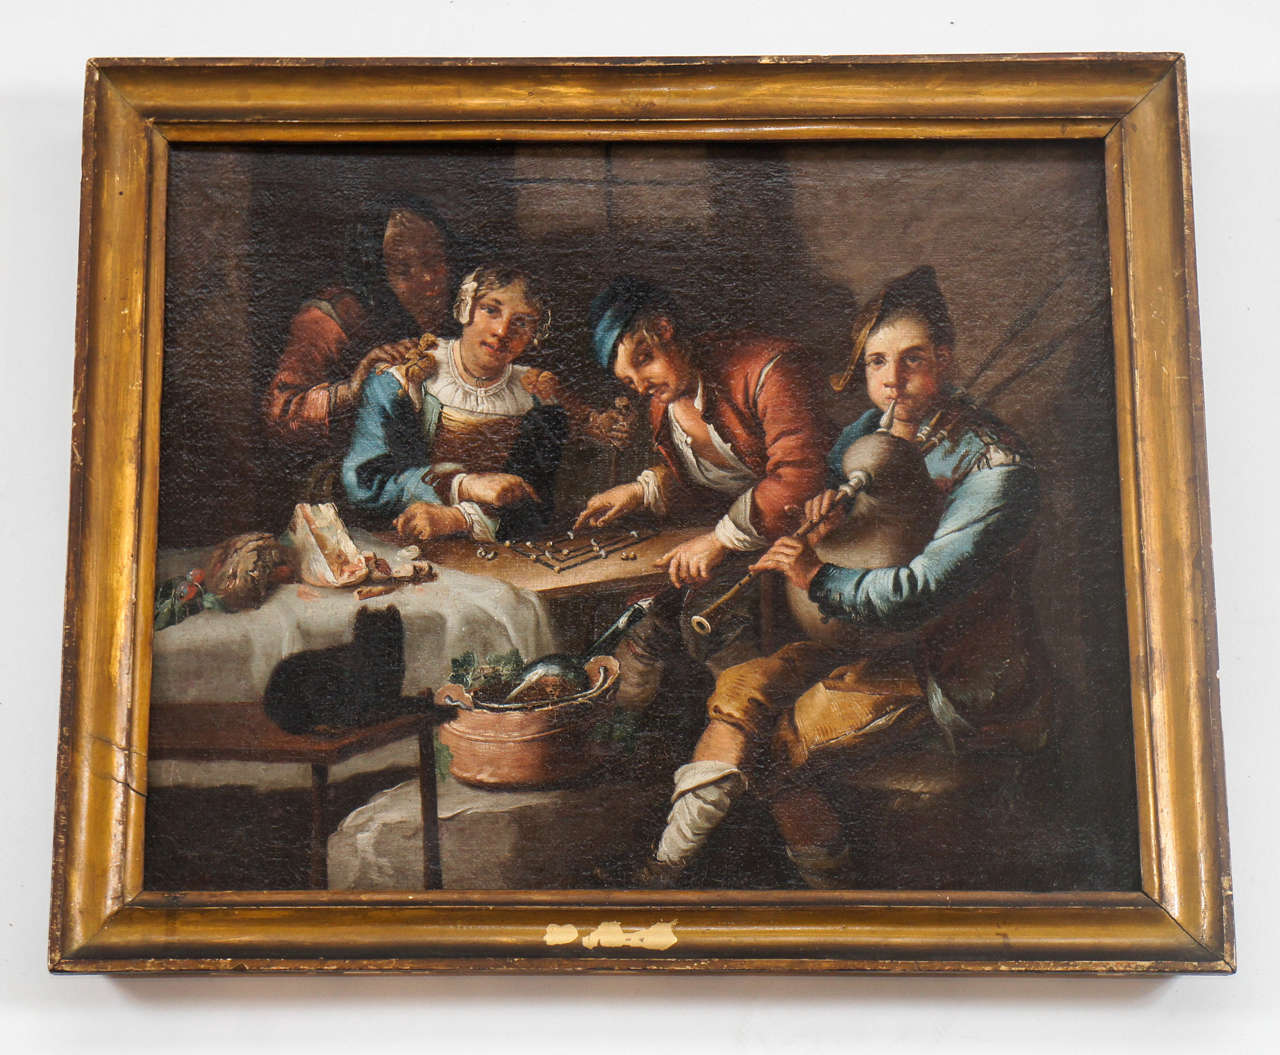 Wonderful early 17th century Dutch or Flemish genre painting of a gathering around a table with games and music; circle of Adriaen Brouwer (Oudenaarde, c. 1605 – Antwerp, January 1638).  Exceptionally fine technique and detail.  Featured in the 2016